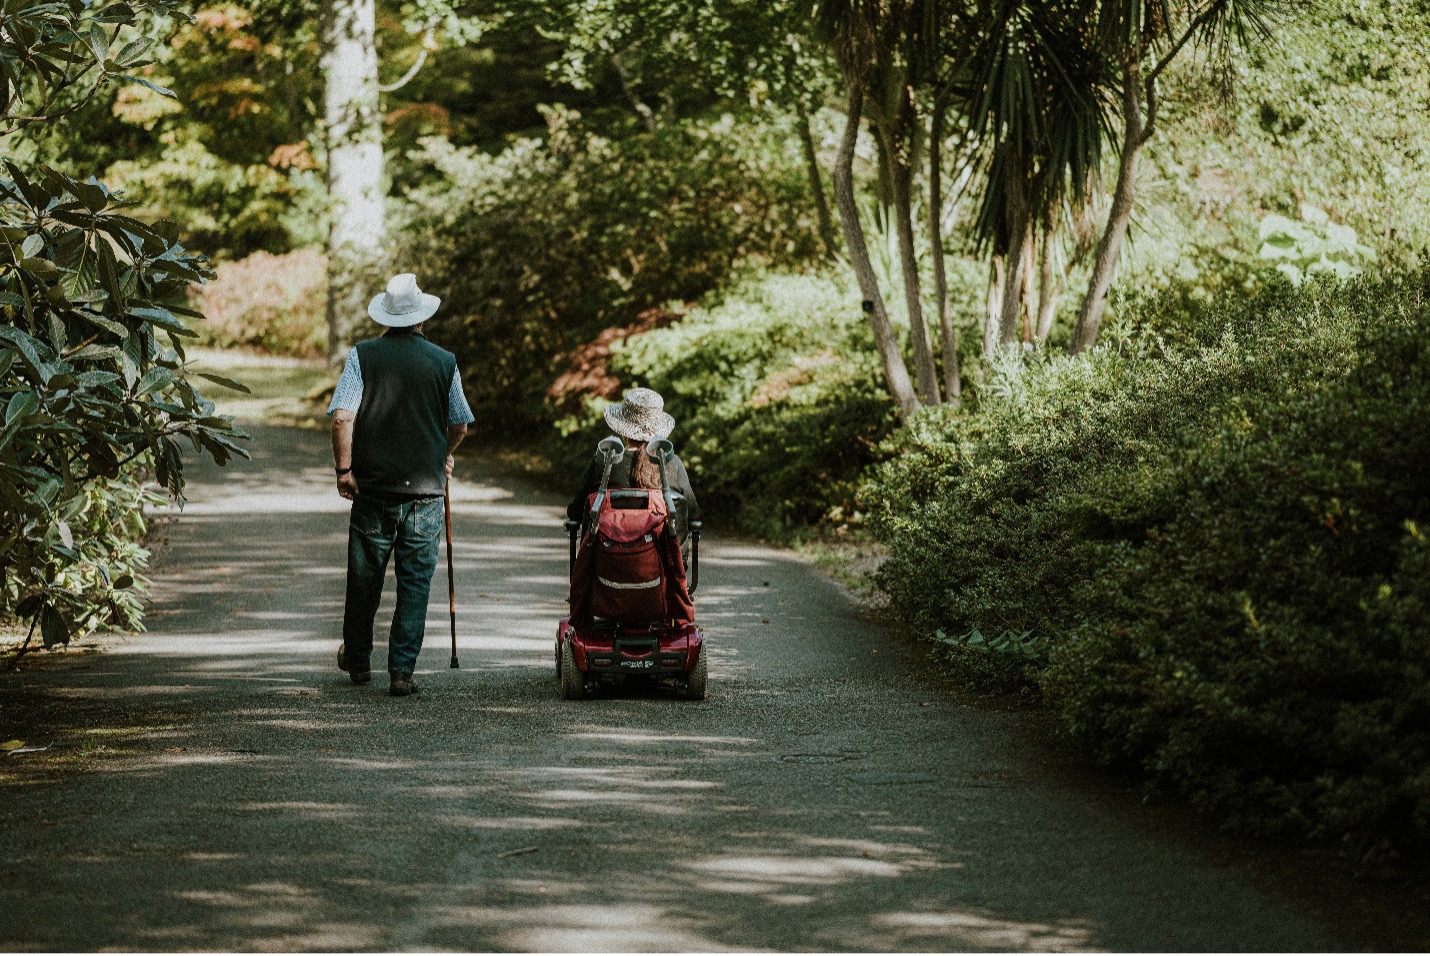 Photo from behind of two individuals in nature - one is walking with a cane and the other is using a mobility device that appears to be a scooter.